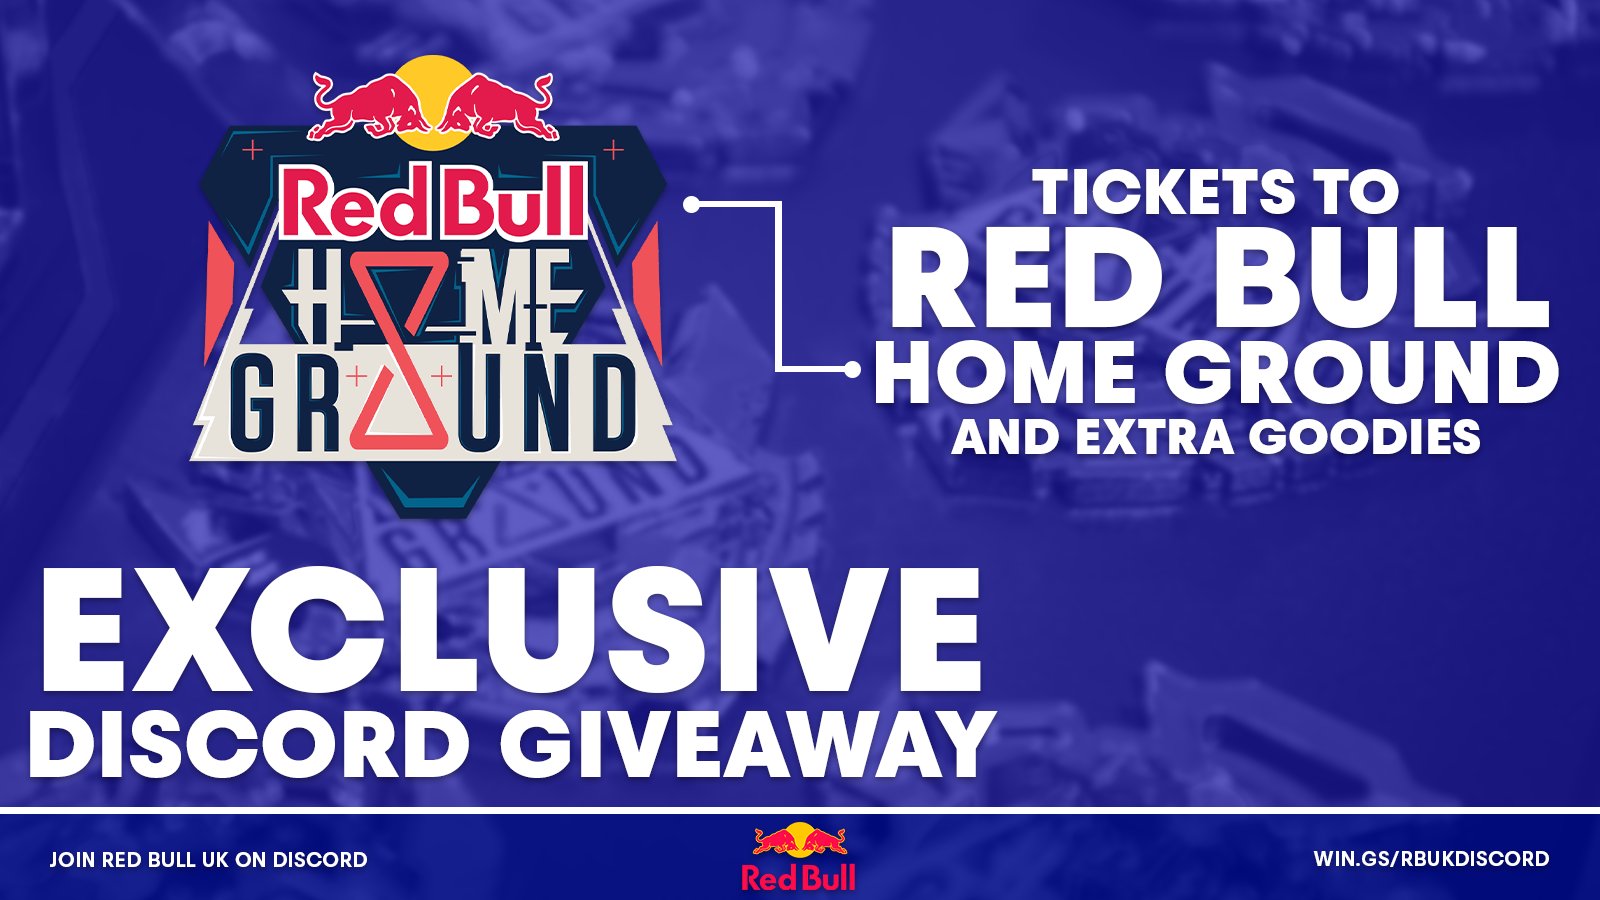 Red Bull UK on Twitter: "Our new monthly giveaway is now LIVE 🚨 giving away to Red Bull Ground in Manchester for you and a friend! 🥳 How do